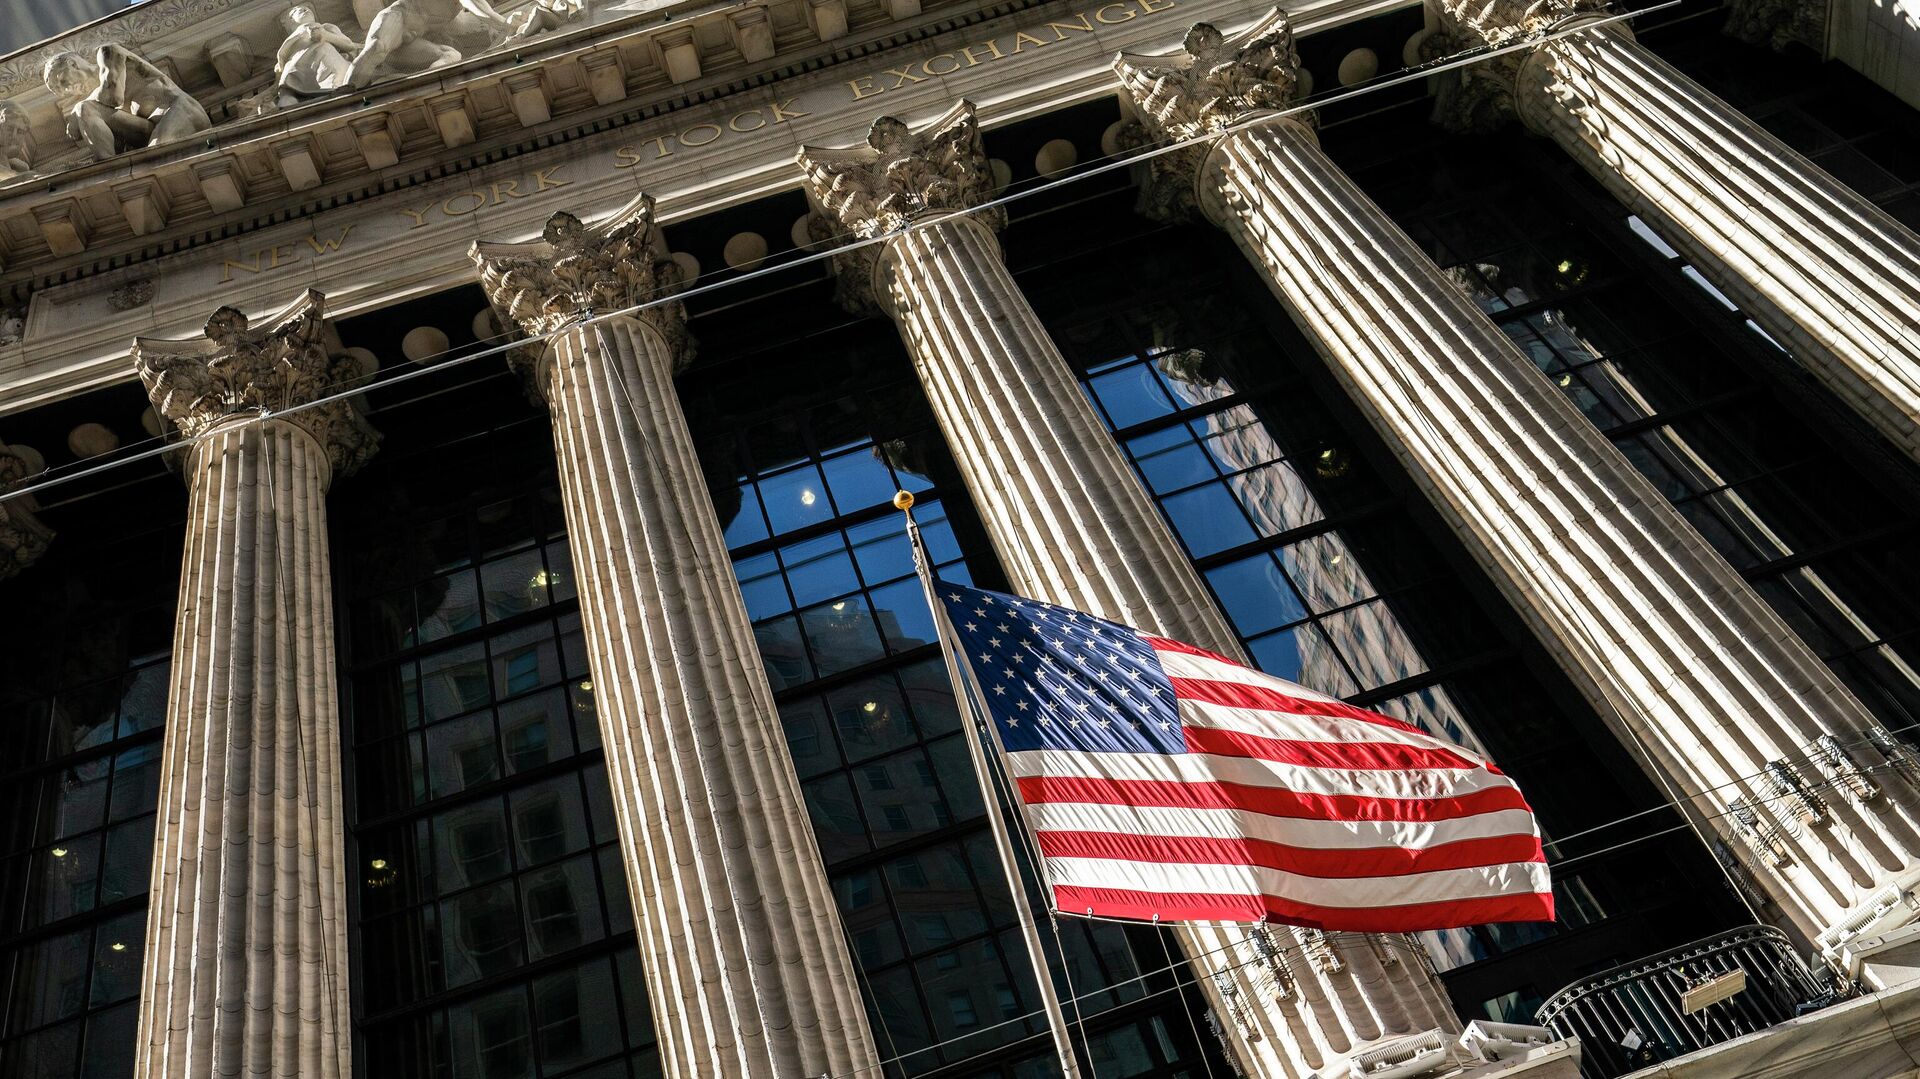 A U.S. flag waves outside the New York Stock Exchange, Monday, Jan. 24, 2022, in New York. Stocks are drifting between small gains and losses in the early going on Wall Street Tuesday, May 3, 2022 as investors await Wednesday's decision by the Federal Reserve on interest rates. The Fed is expected to raise its benchmark rate by twice the usual amount this week as it steps up its fight against inflation, which is at a four-decade high. - Sputnik International, 1920, 18.10.2022